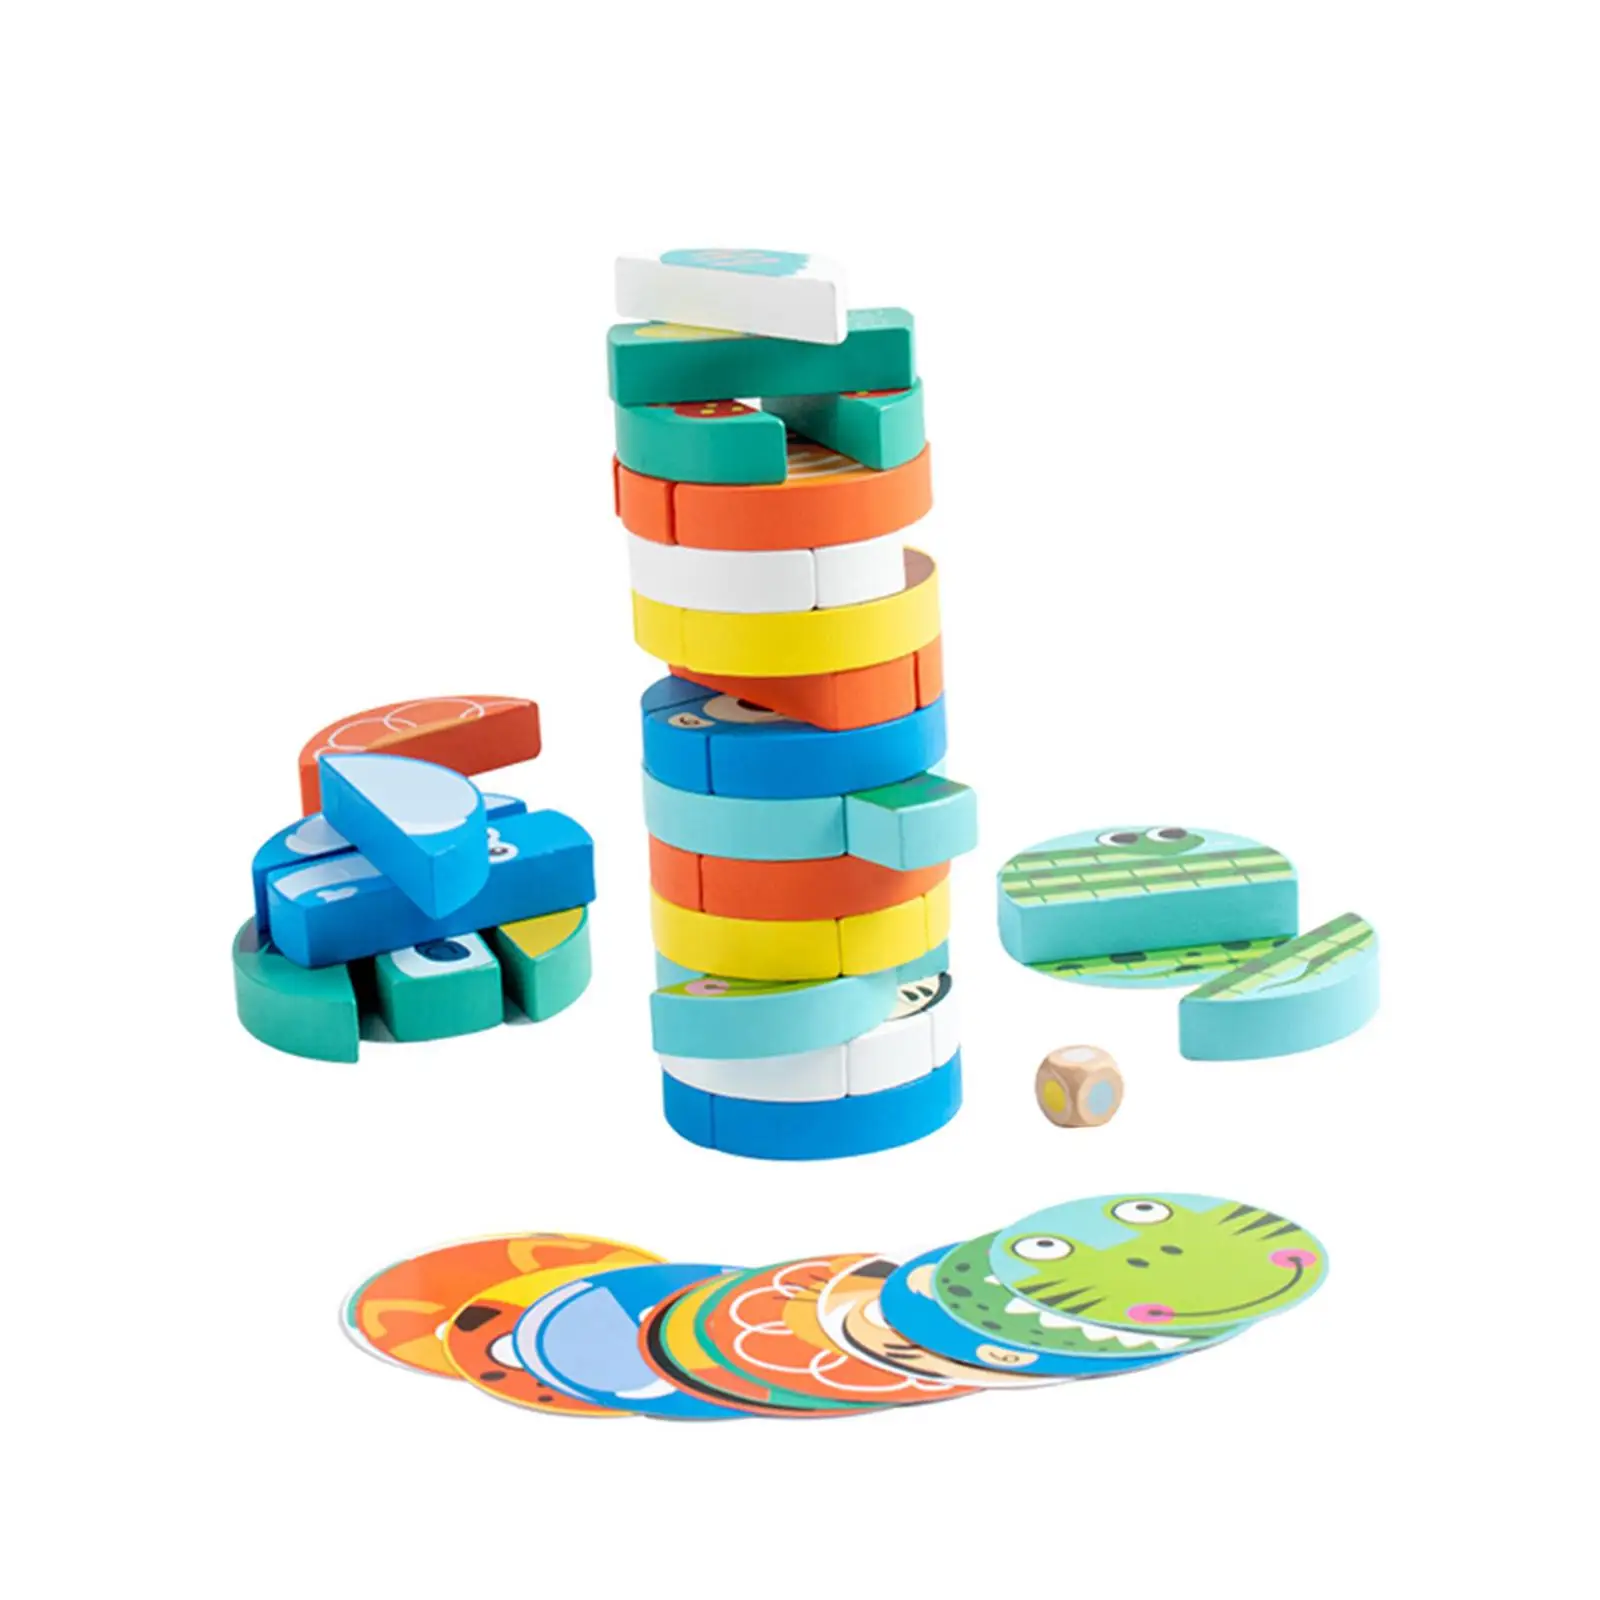 Wooden Blocks Stacking Game Preschool Learning Tumble Towers Game Board Games for Birthday Gifts Festival Holiday Boys Girls